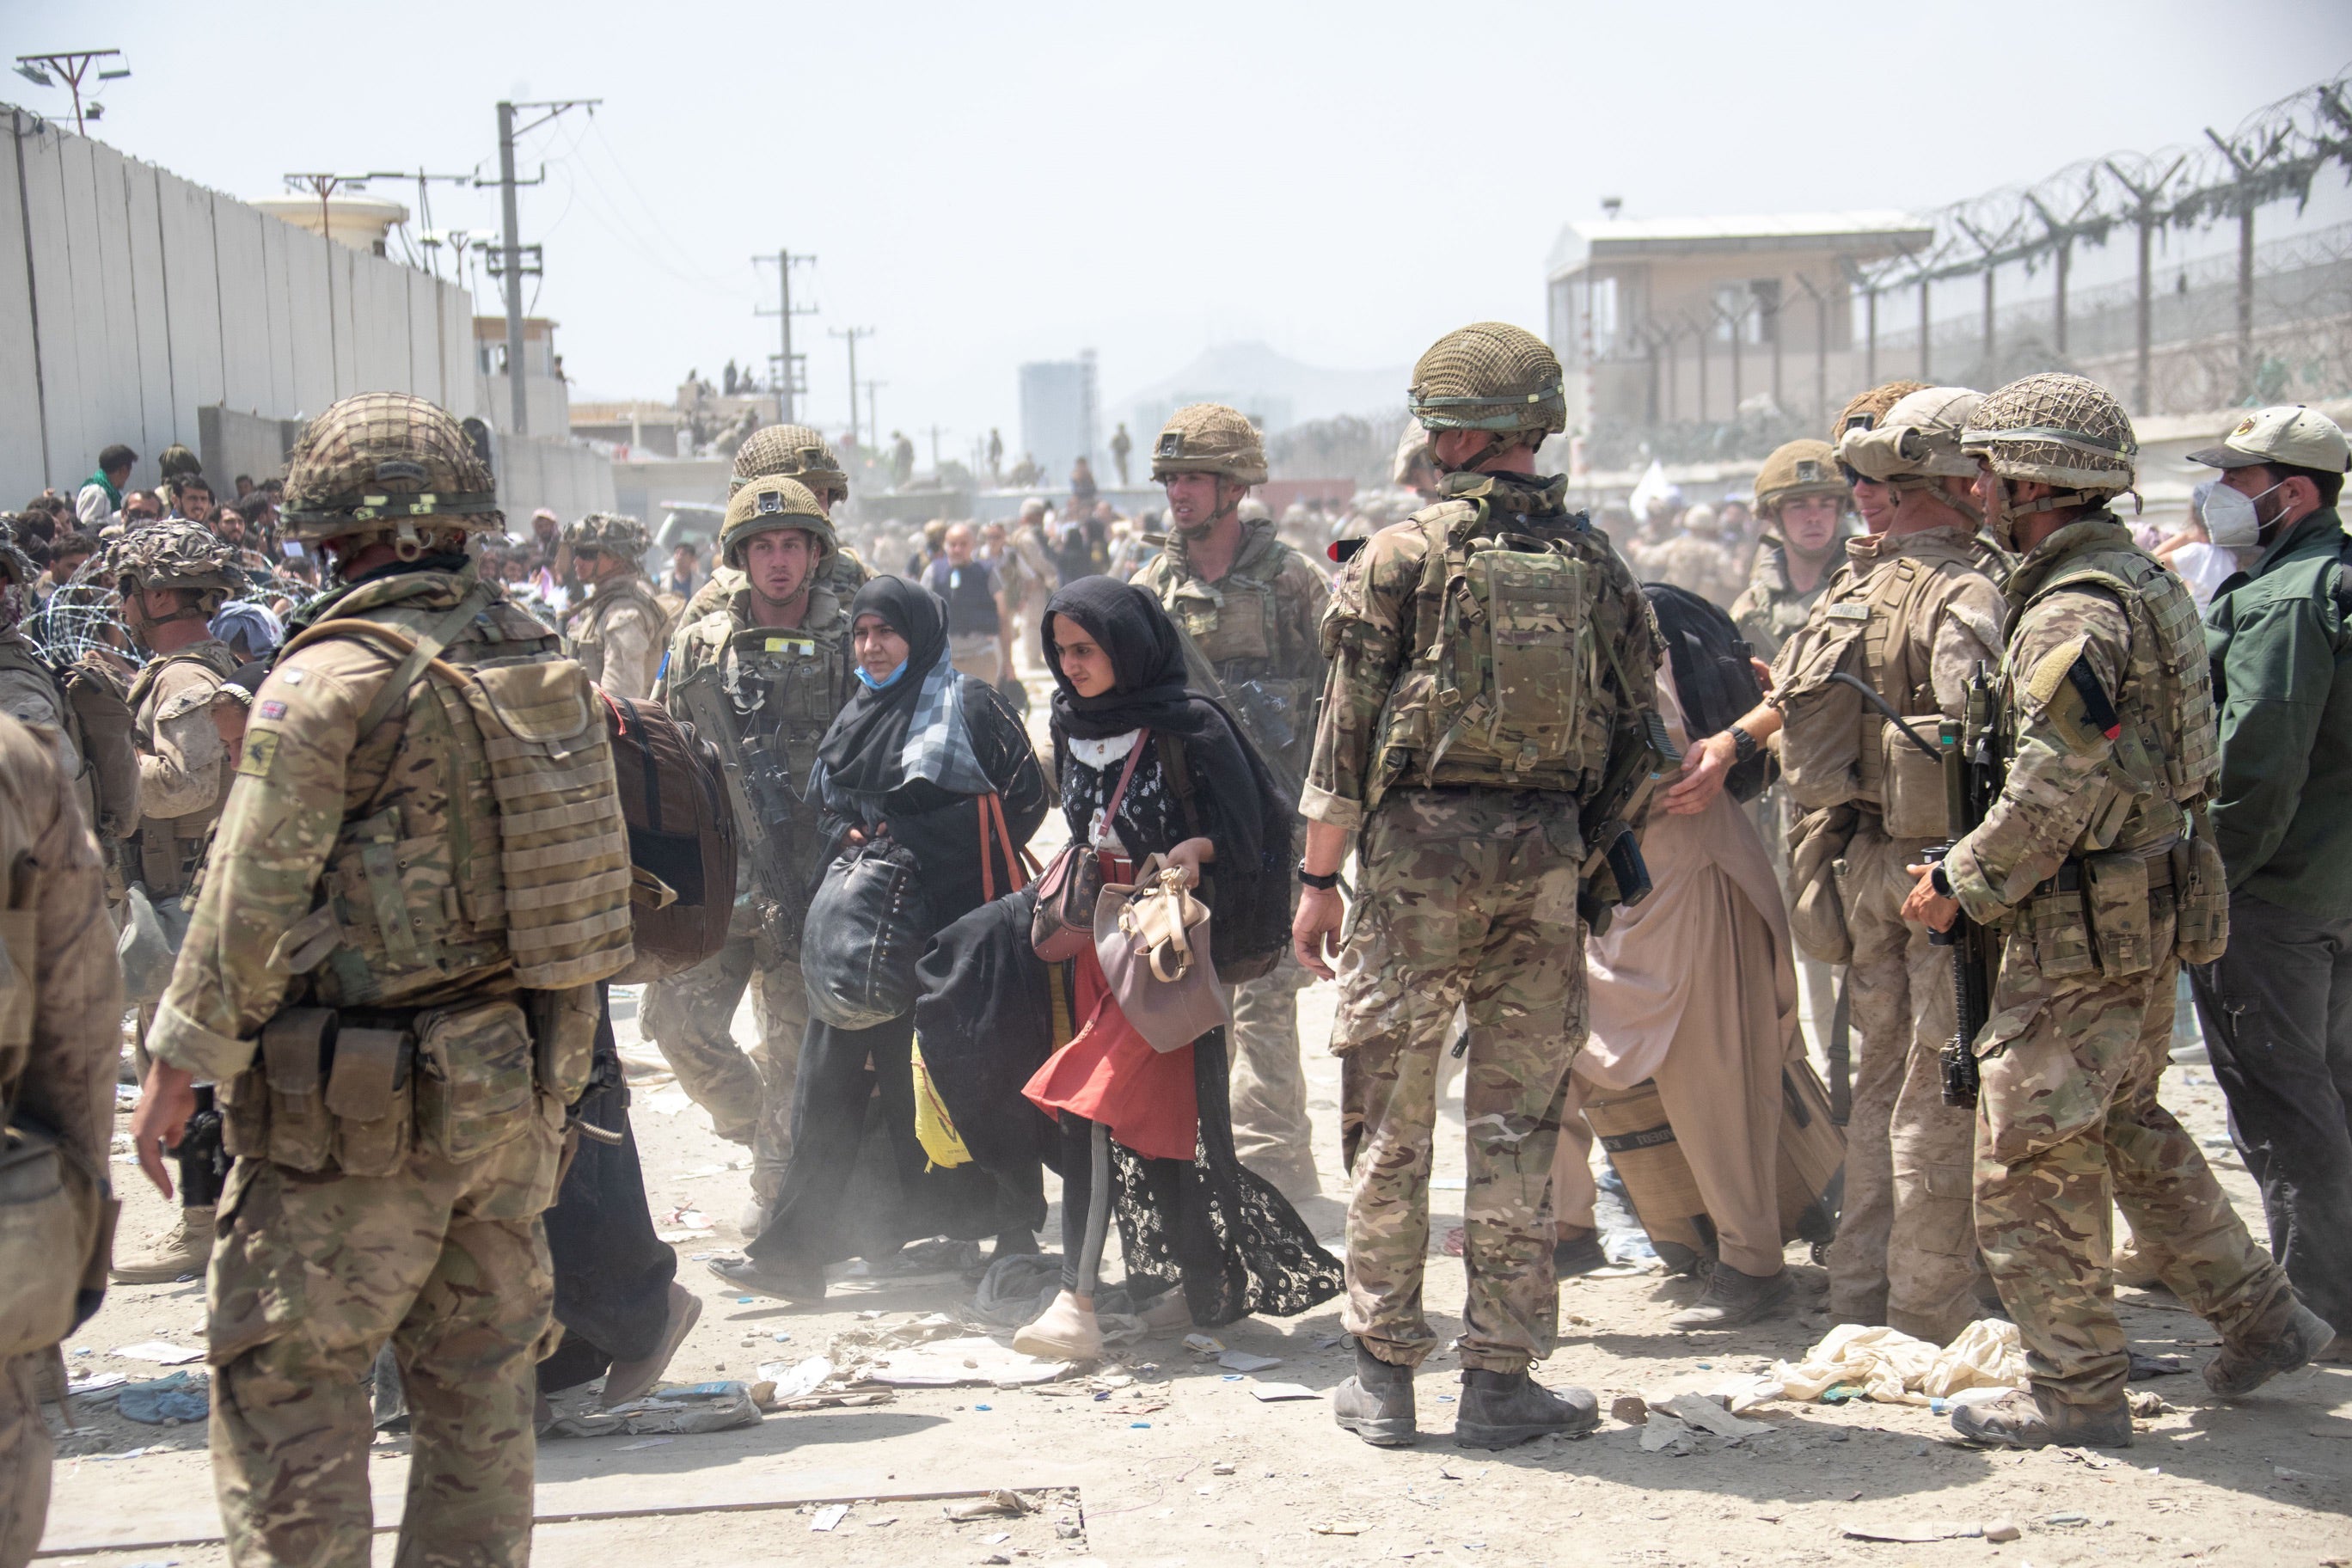 British forces work to evacuate Afghans from Kabul in August 2021